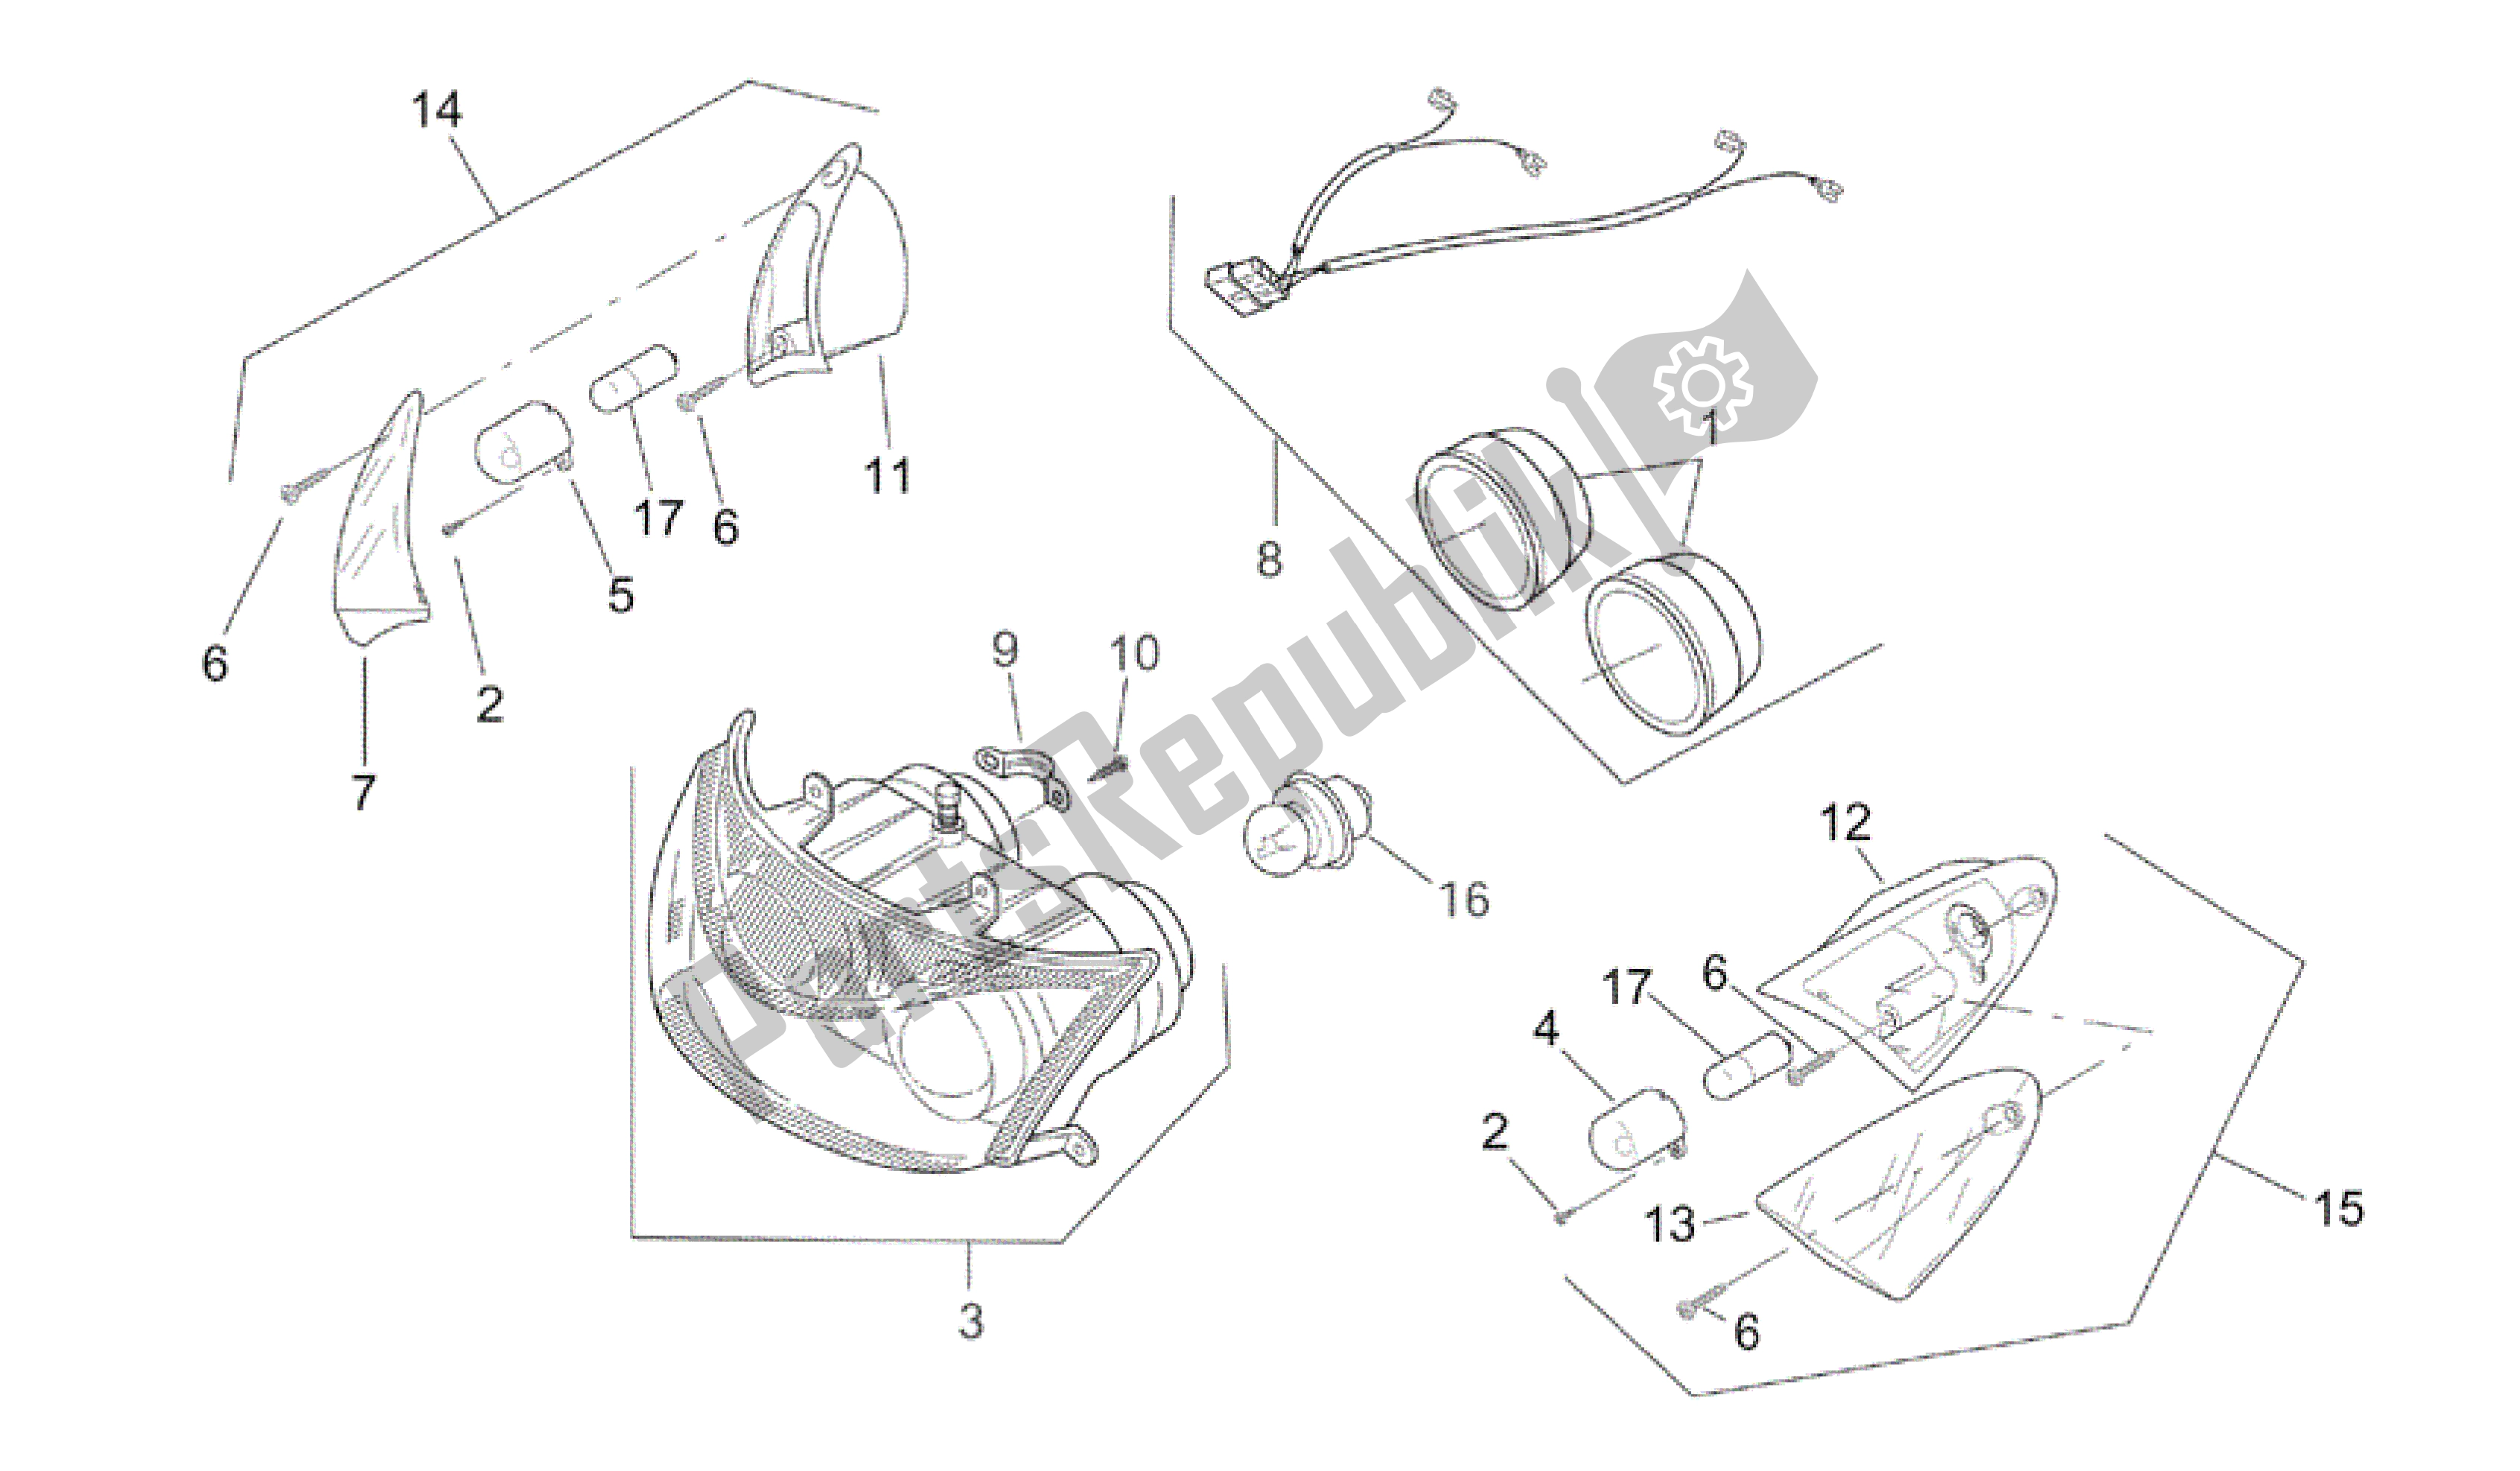 All parts for the Front Lights of the Aprilia SR 50 2000 - 2004